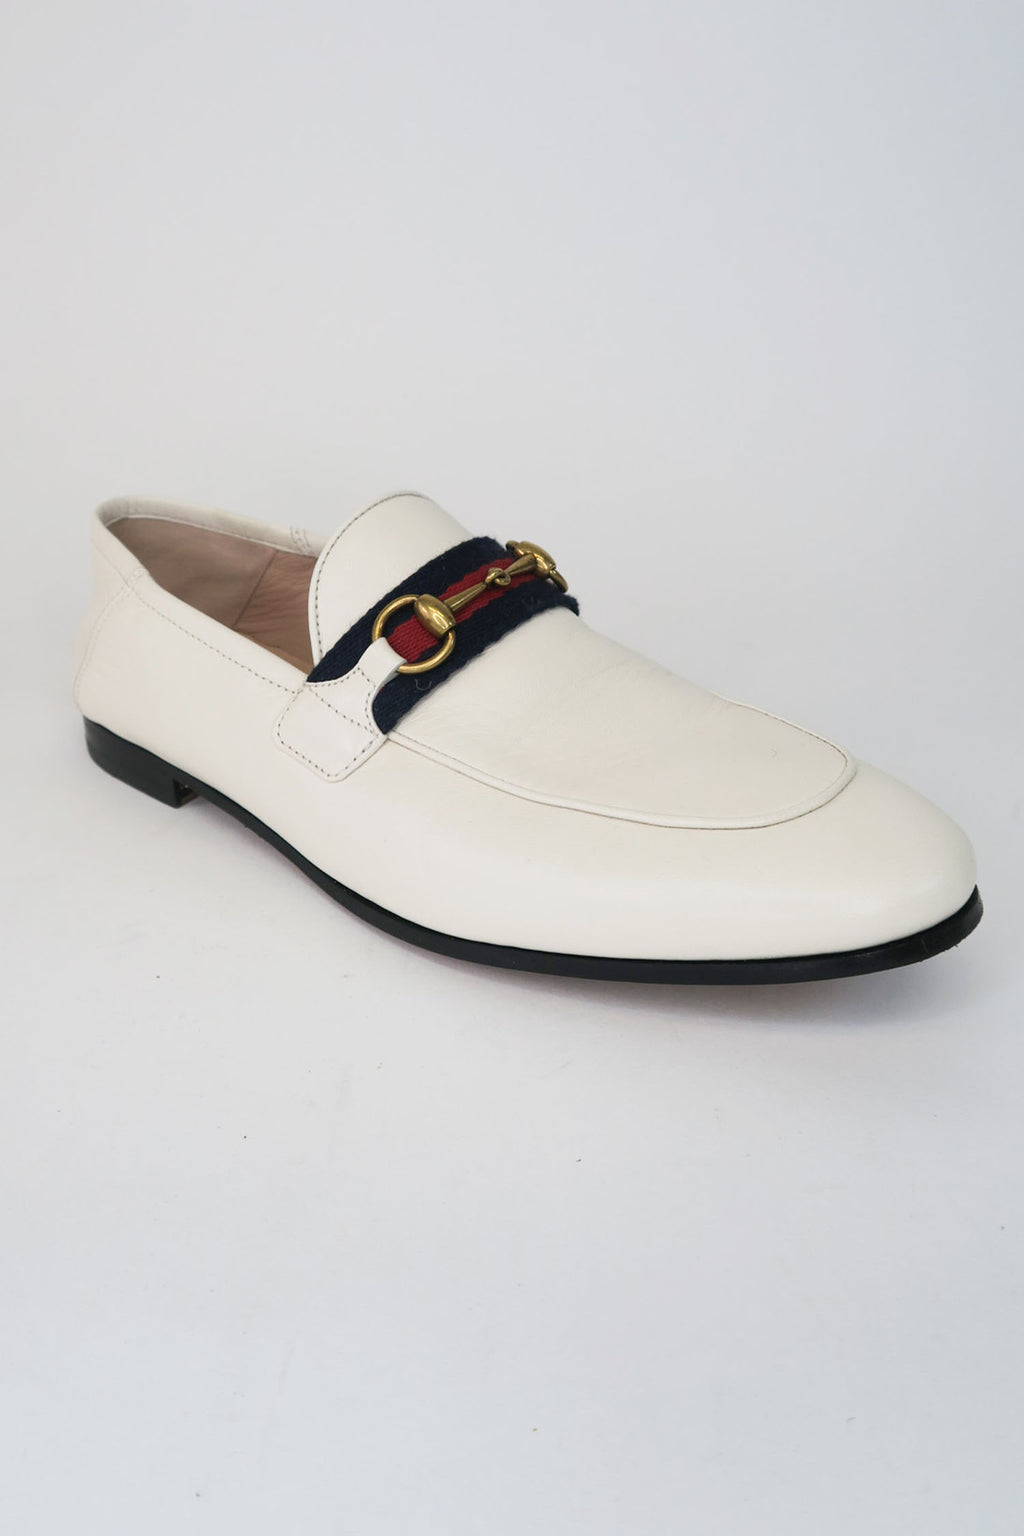 Gucci Brixton Web Accent Loafers sz 39